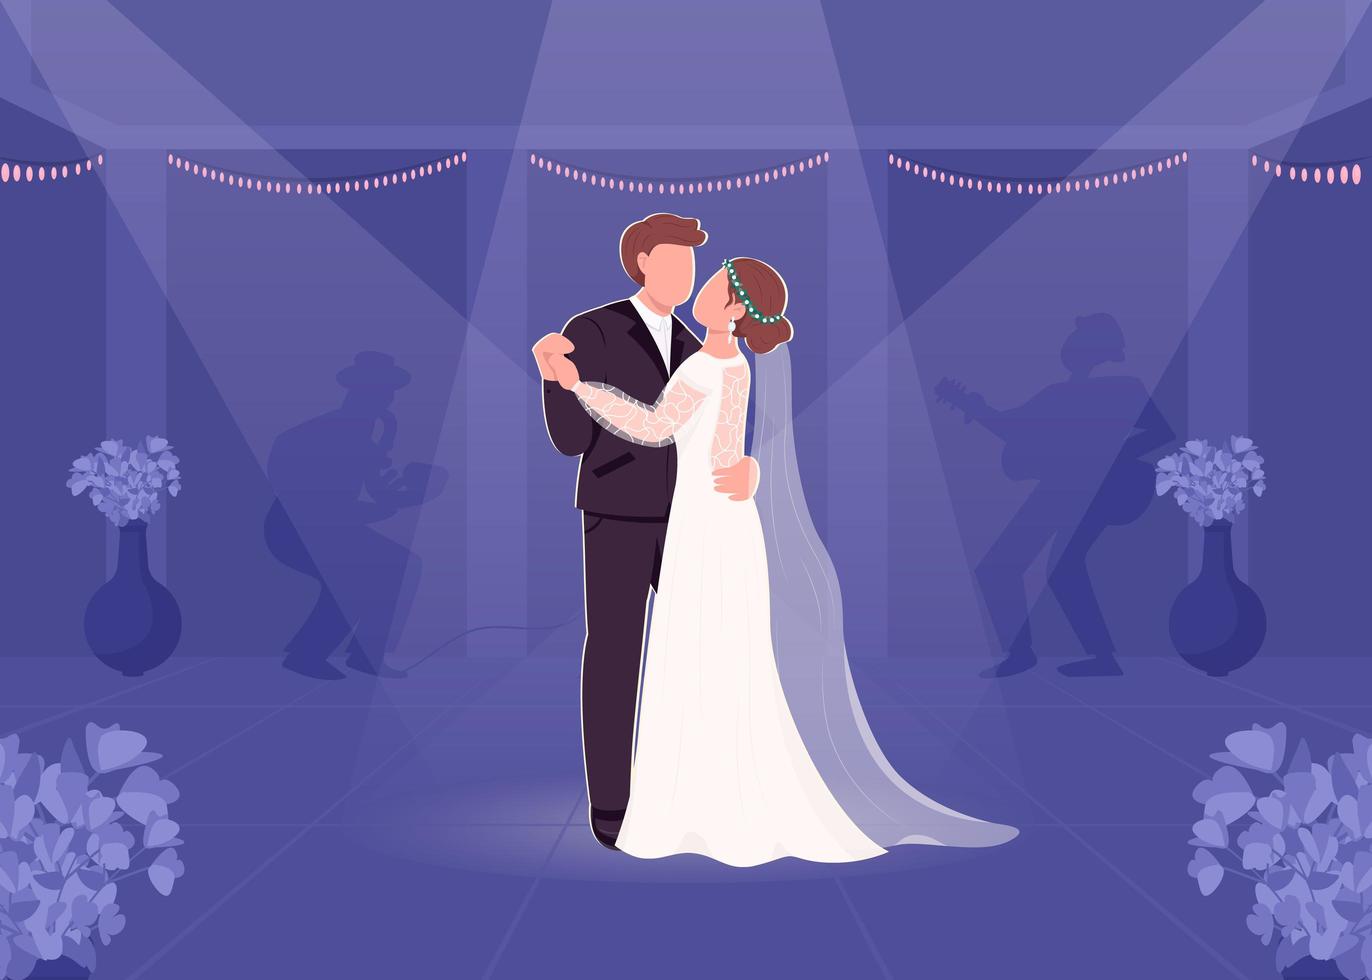 First bride and groom dance vector